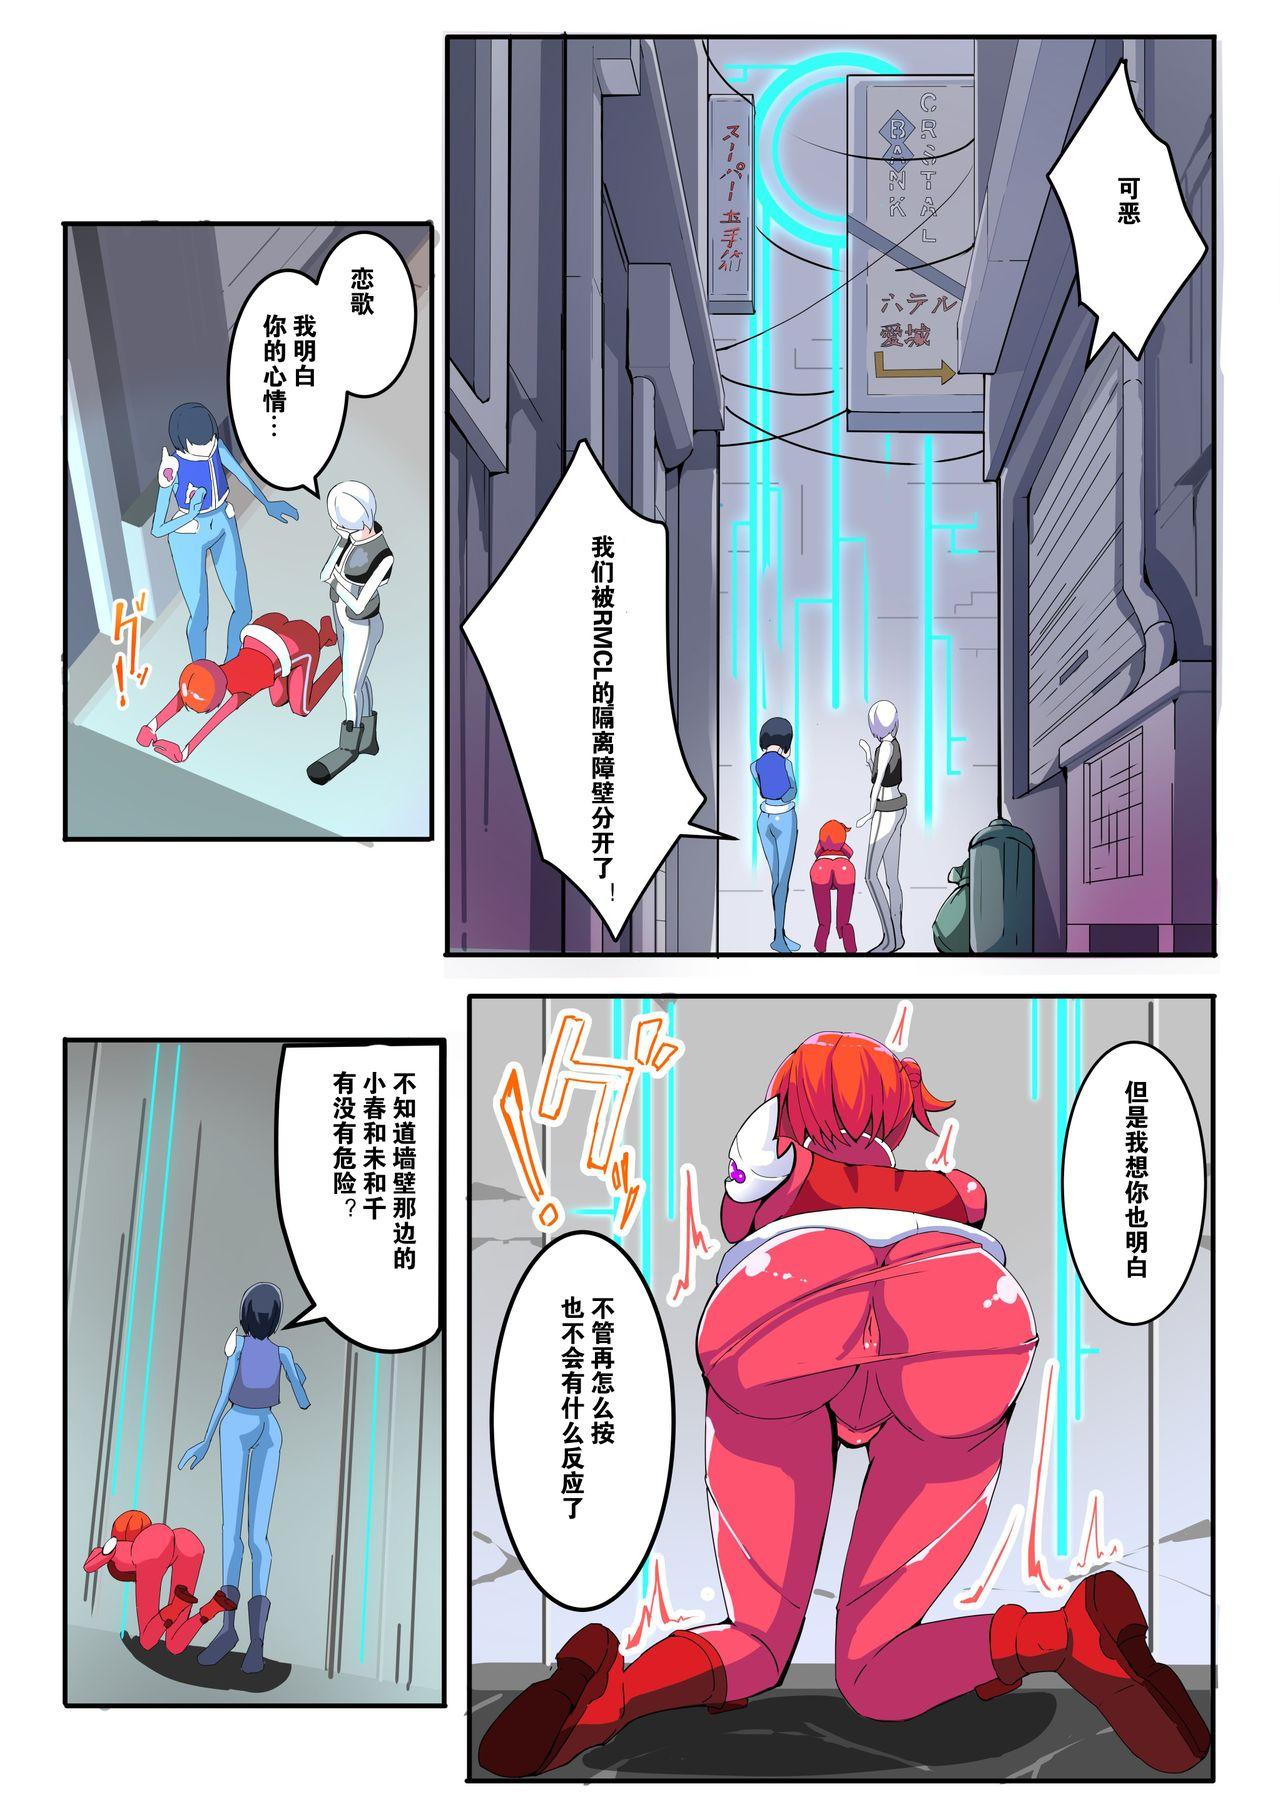 Butts Maso Seiki Fifth Elements 1 - Original Phat - Page 2